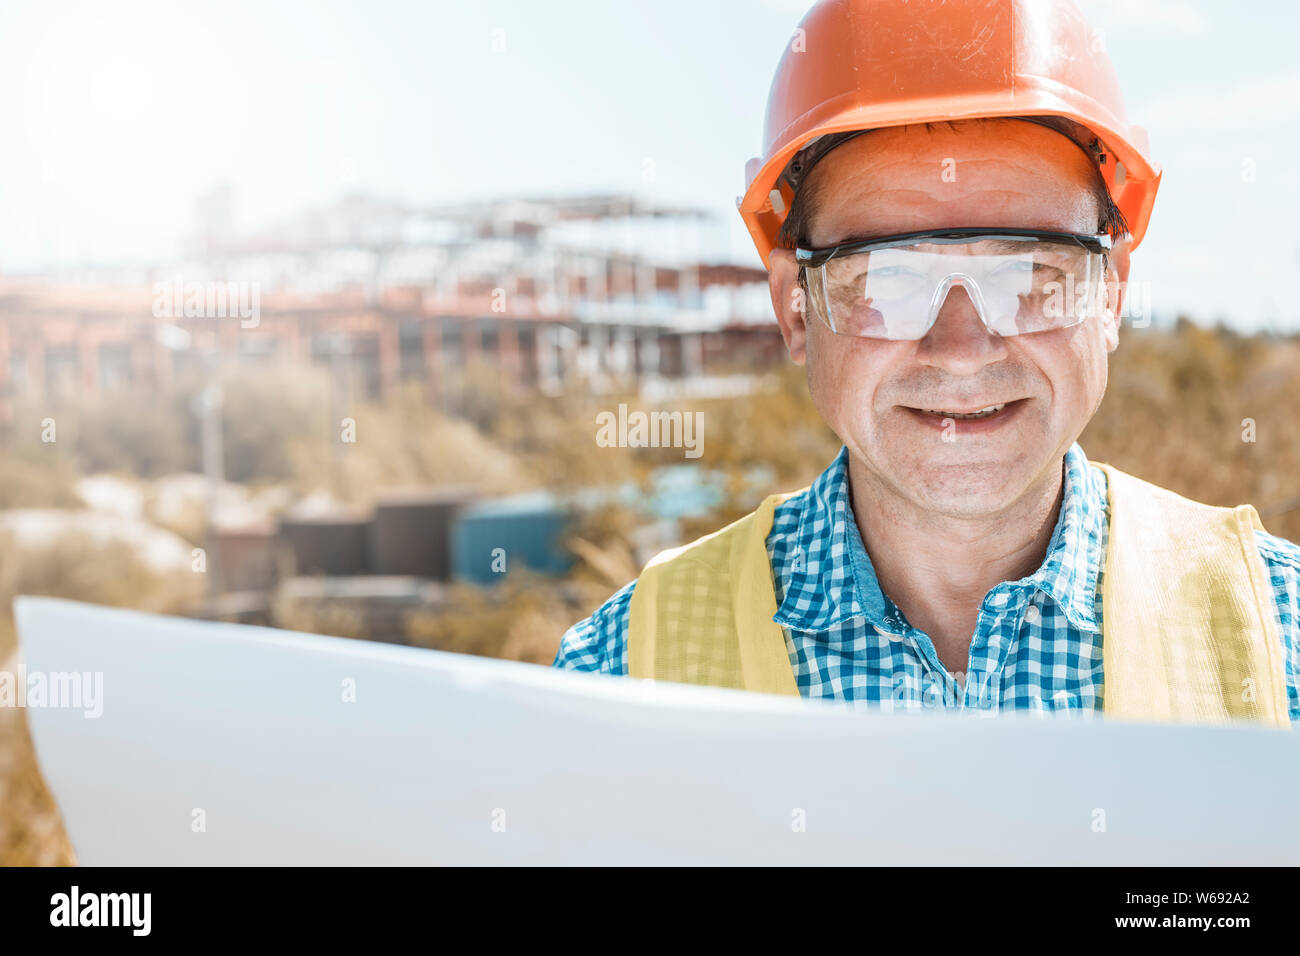 Male builder, architect or engineer in a helmet and glasses on a construction site. Stock Photo